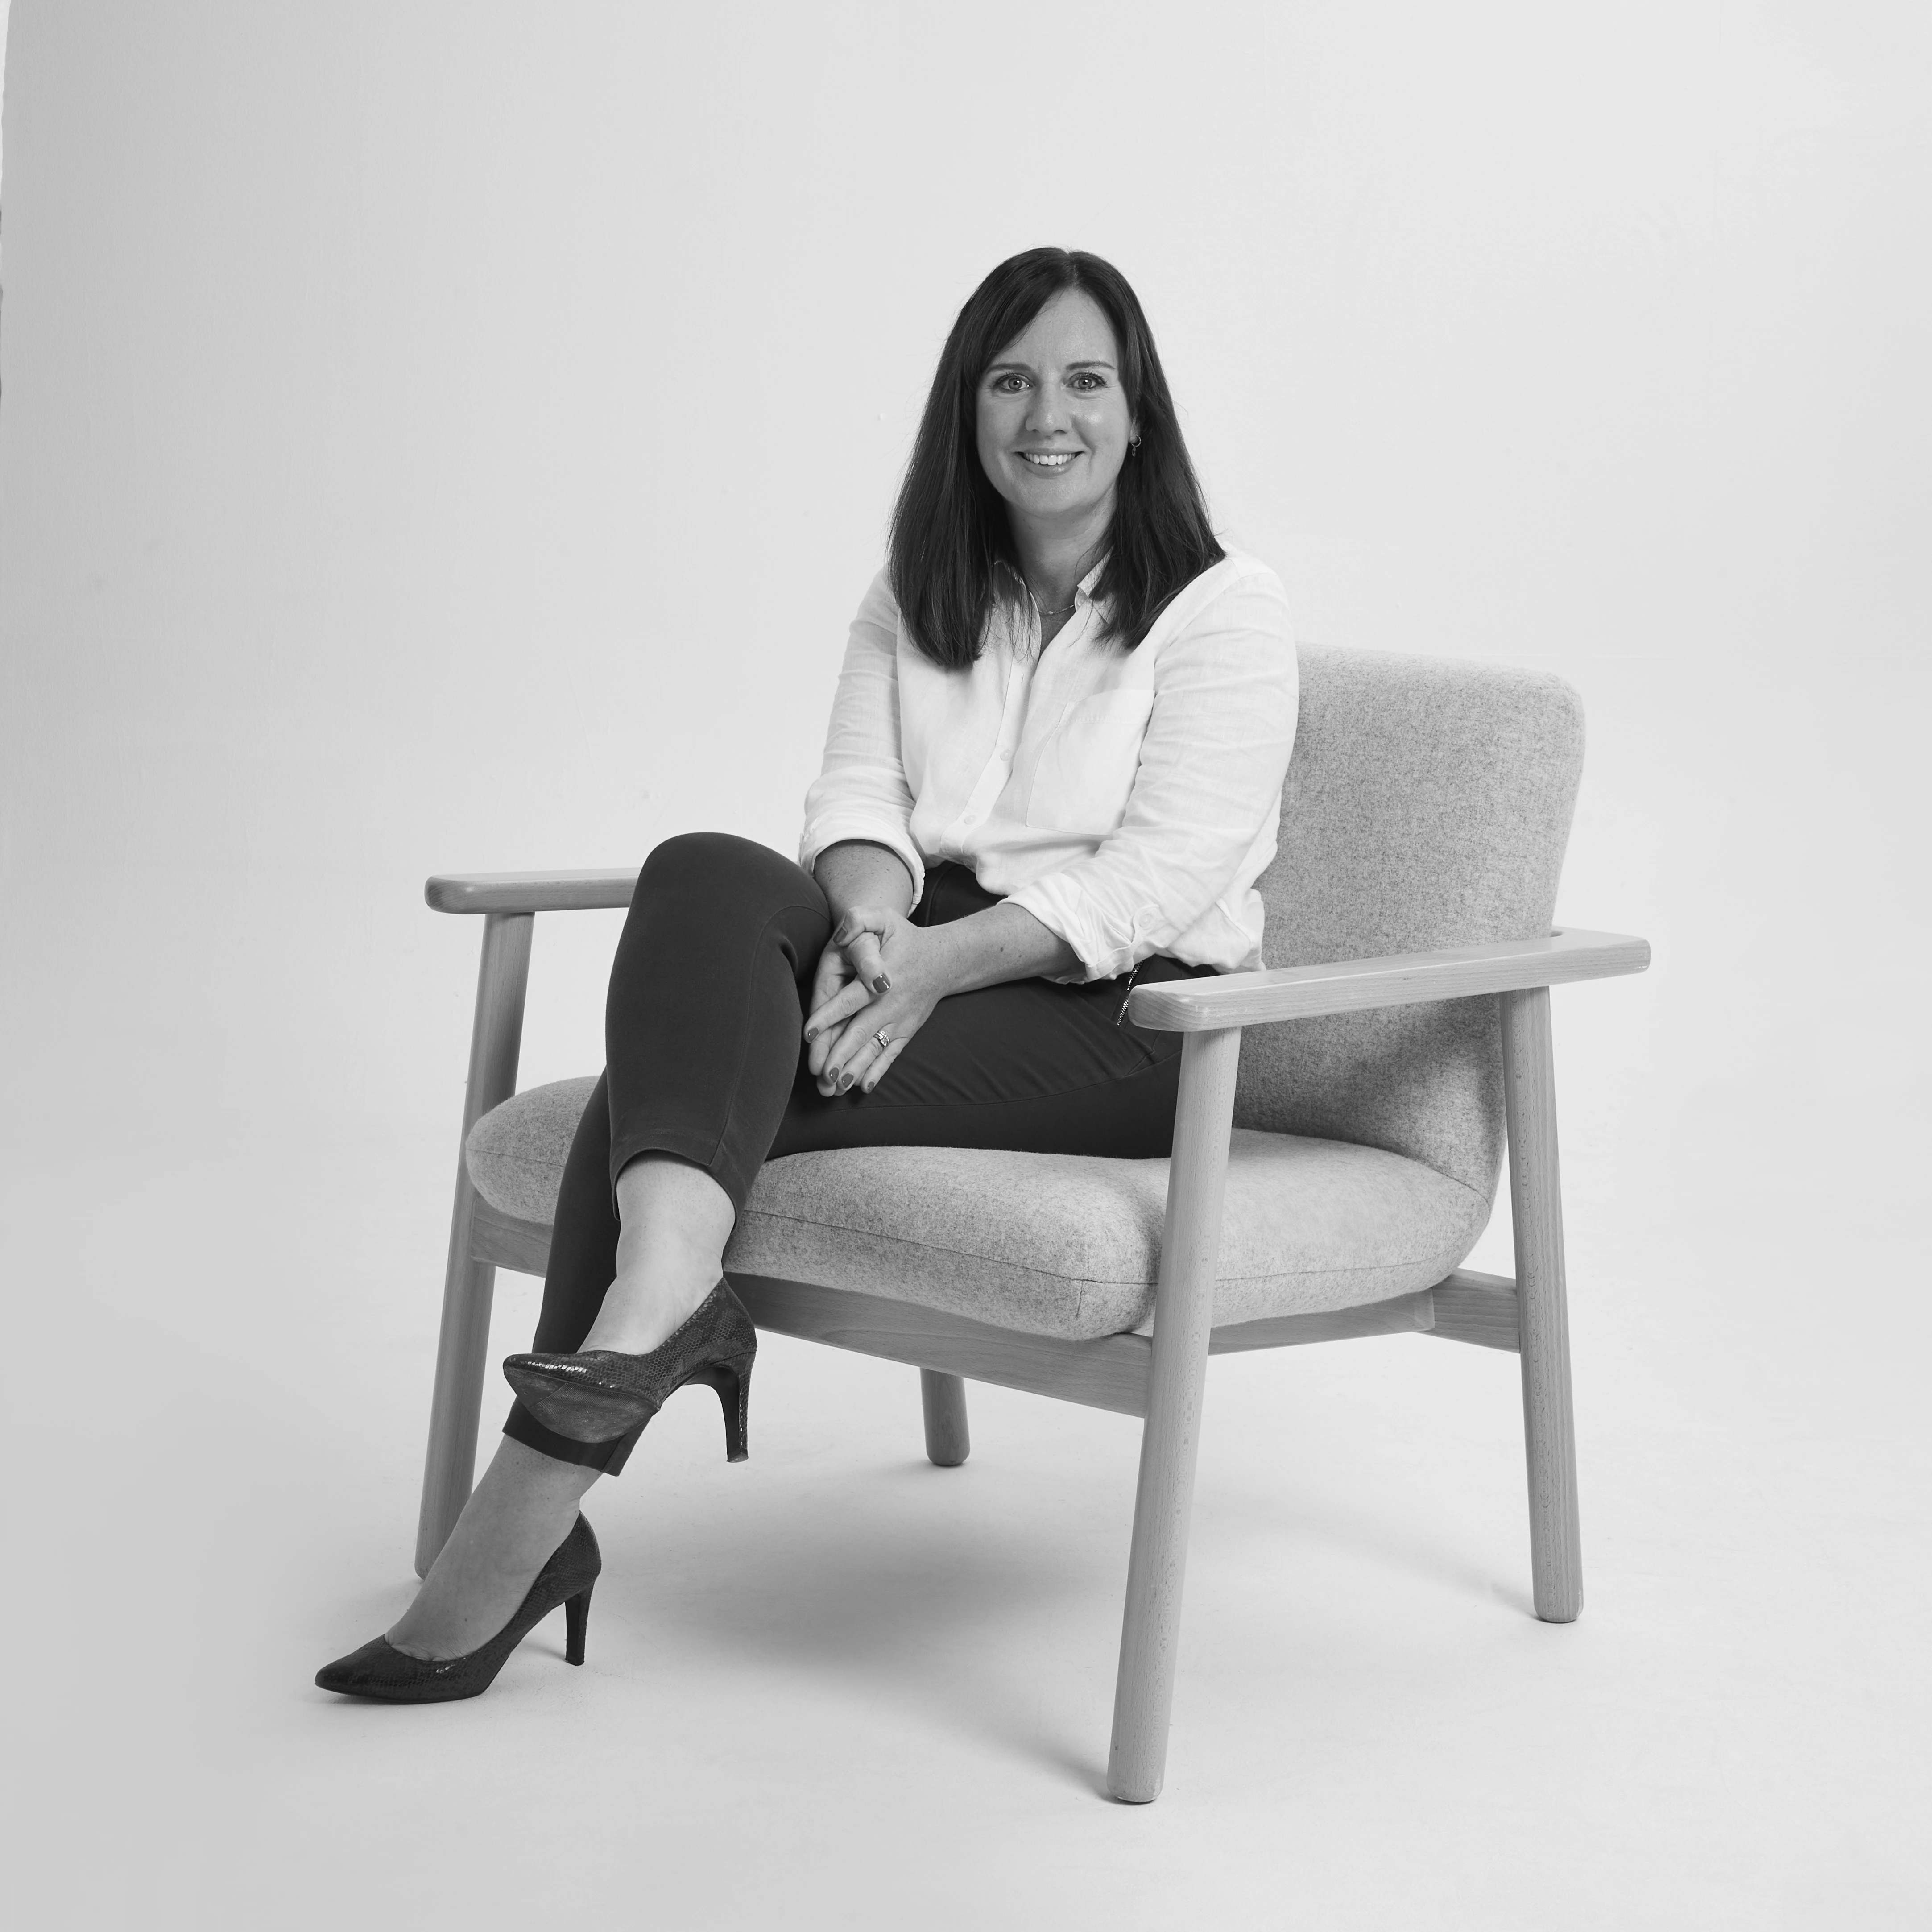 Vicky Taylor National Business Development Manager at Knightsbridge Furniture 